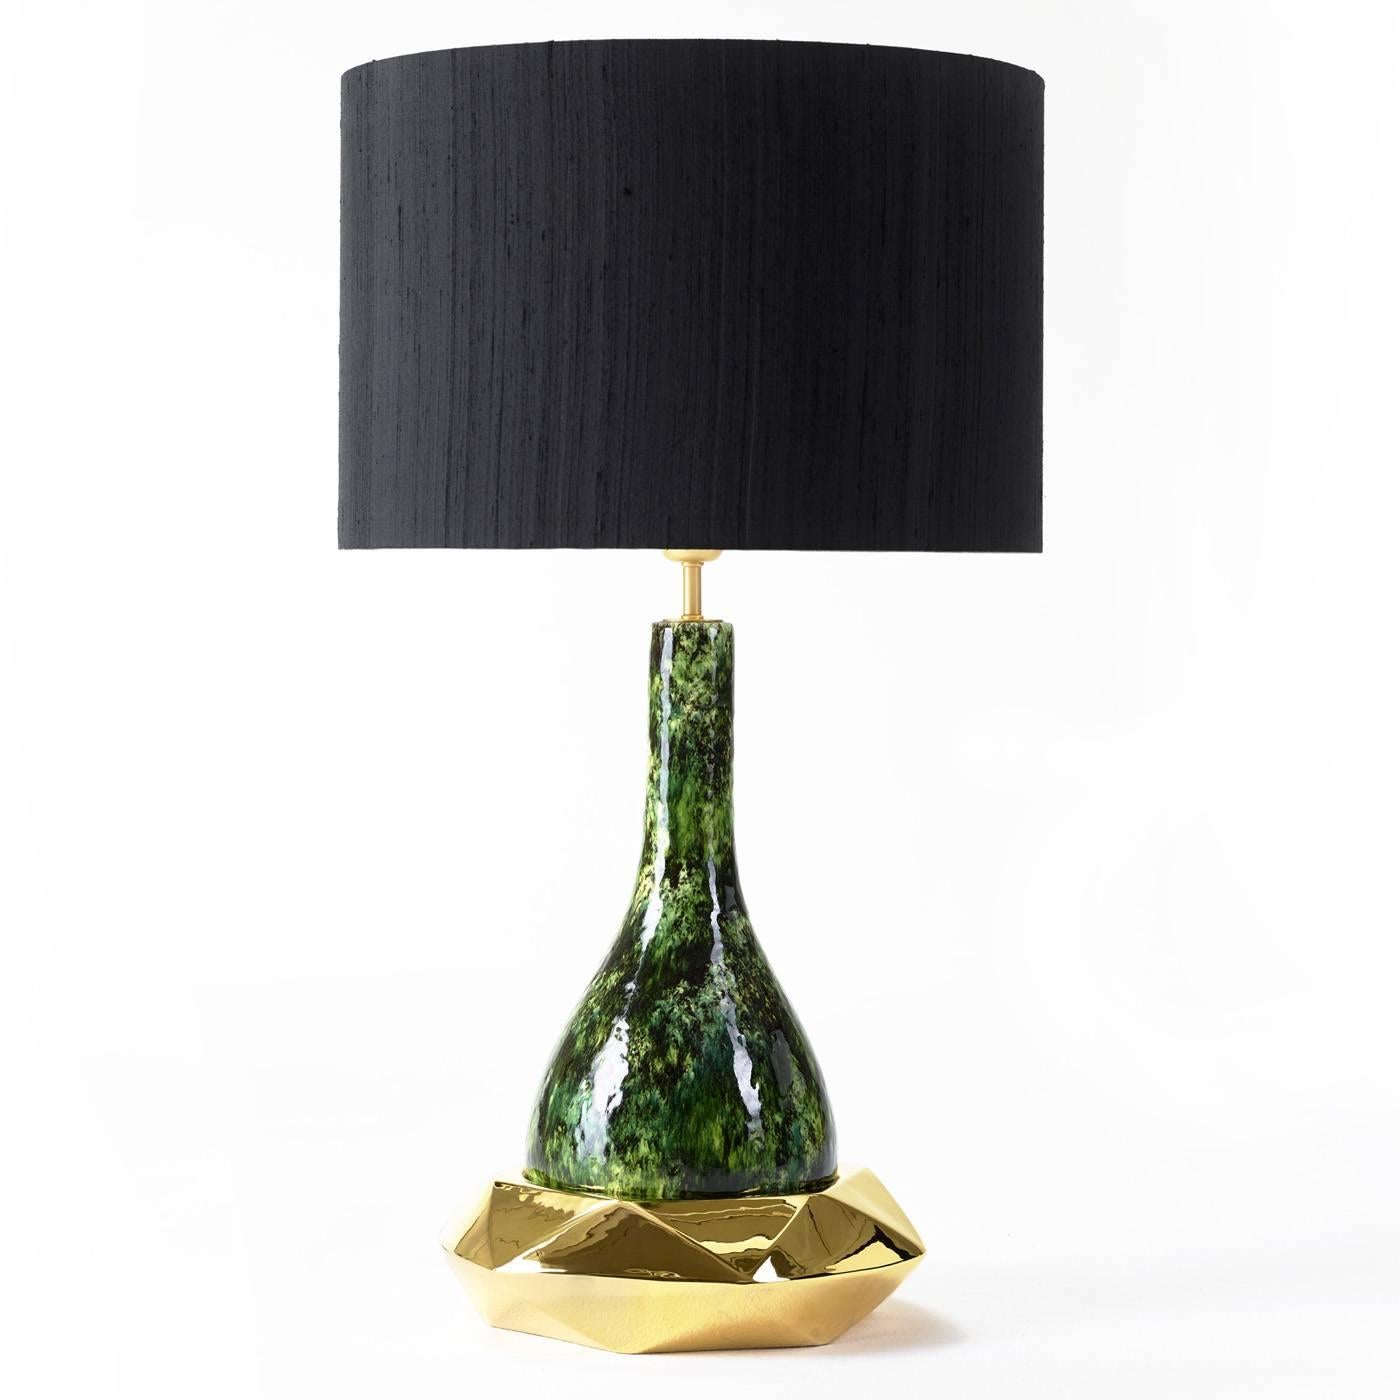 This striking table lamp has a ceramic body finished in ghost green lacquer resting on a multifaceted metal base. It comes with its shade.